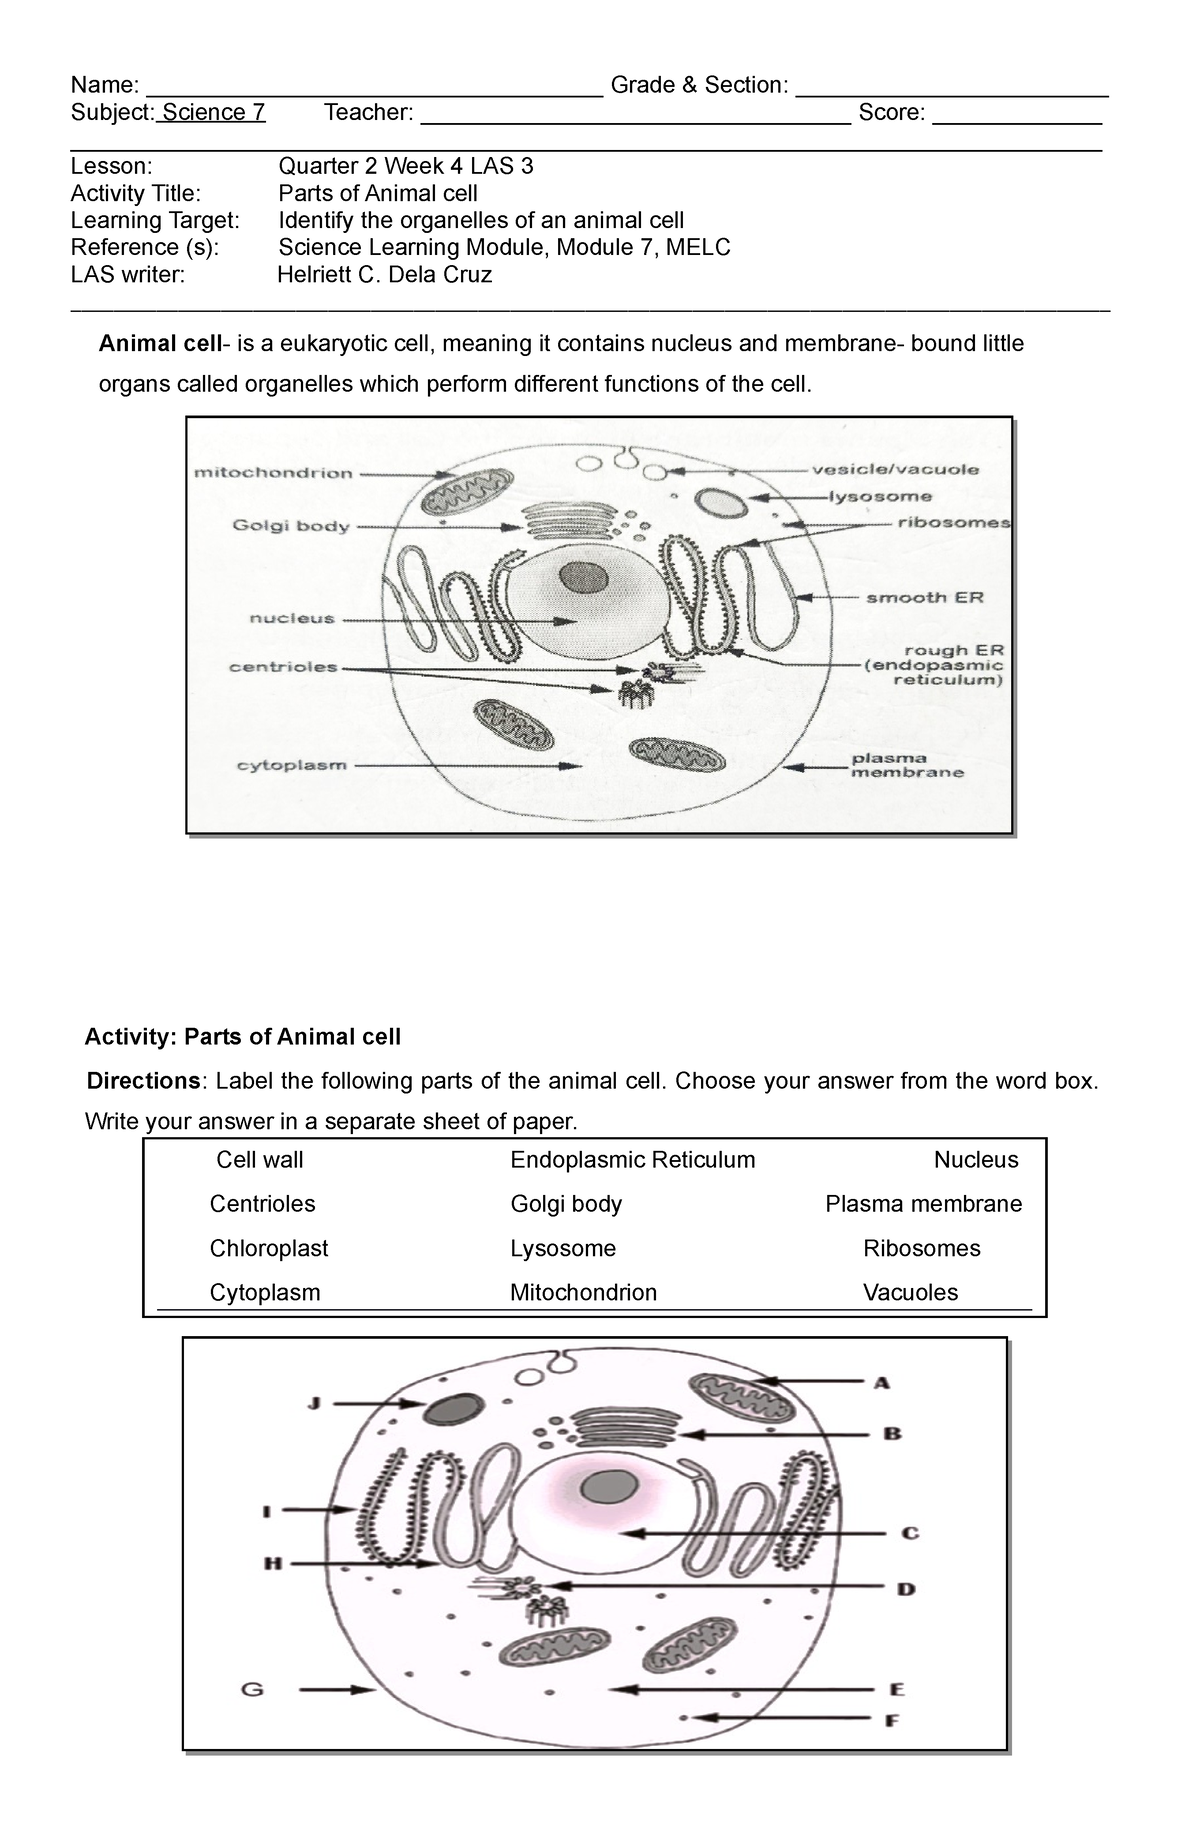 Science 7 Q2 Wee K4 LAS3 - Learning Activities Sheet - Name